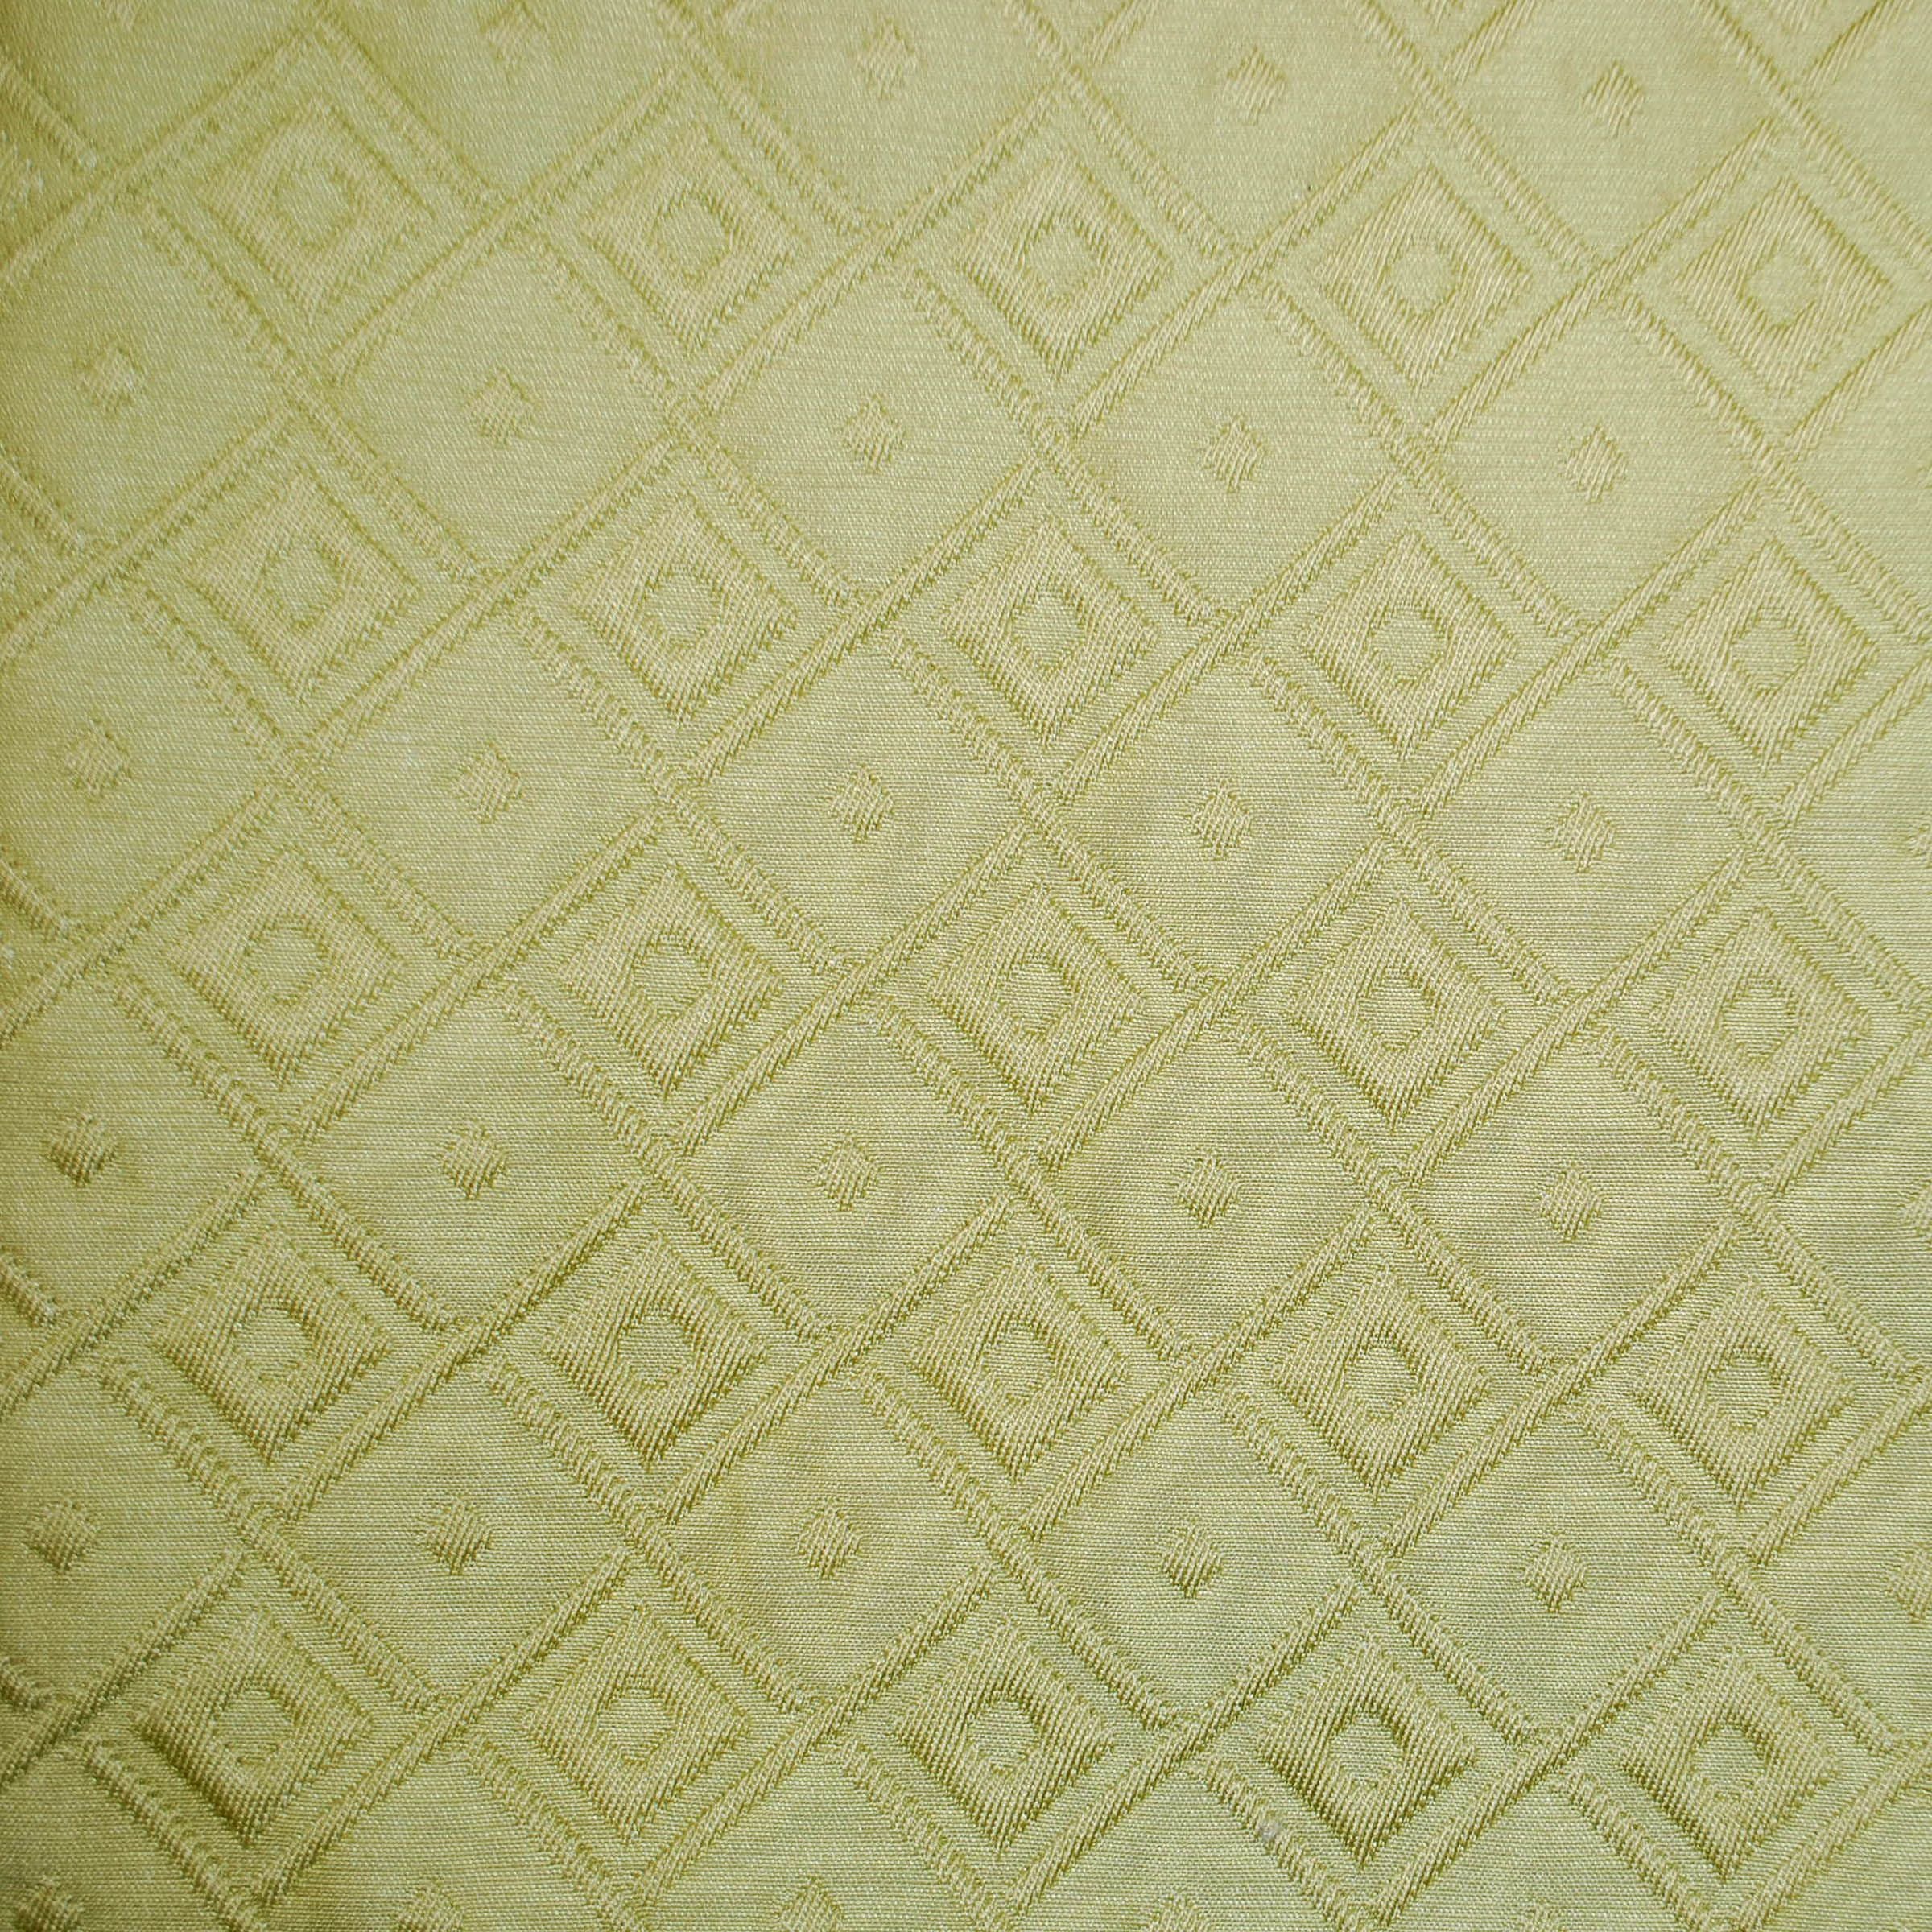 Harrison House fabric in pear color - pattern number VW 0001LASS - by Scalamandre in the Old World Weavers collection